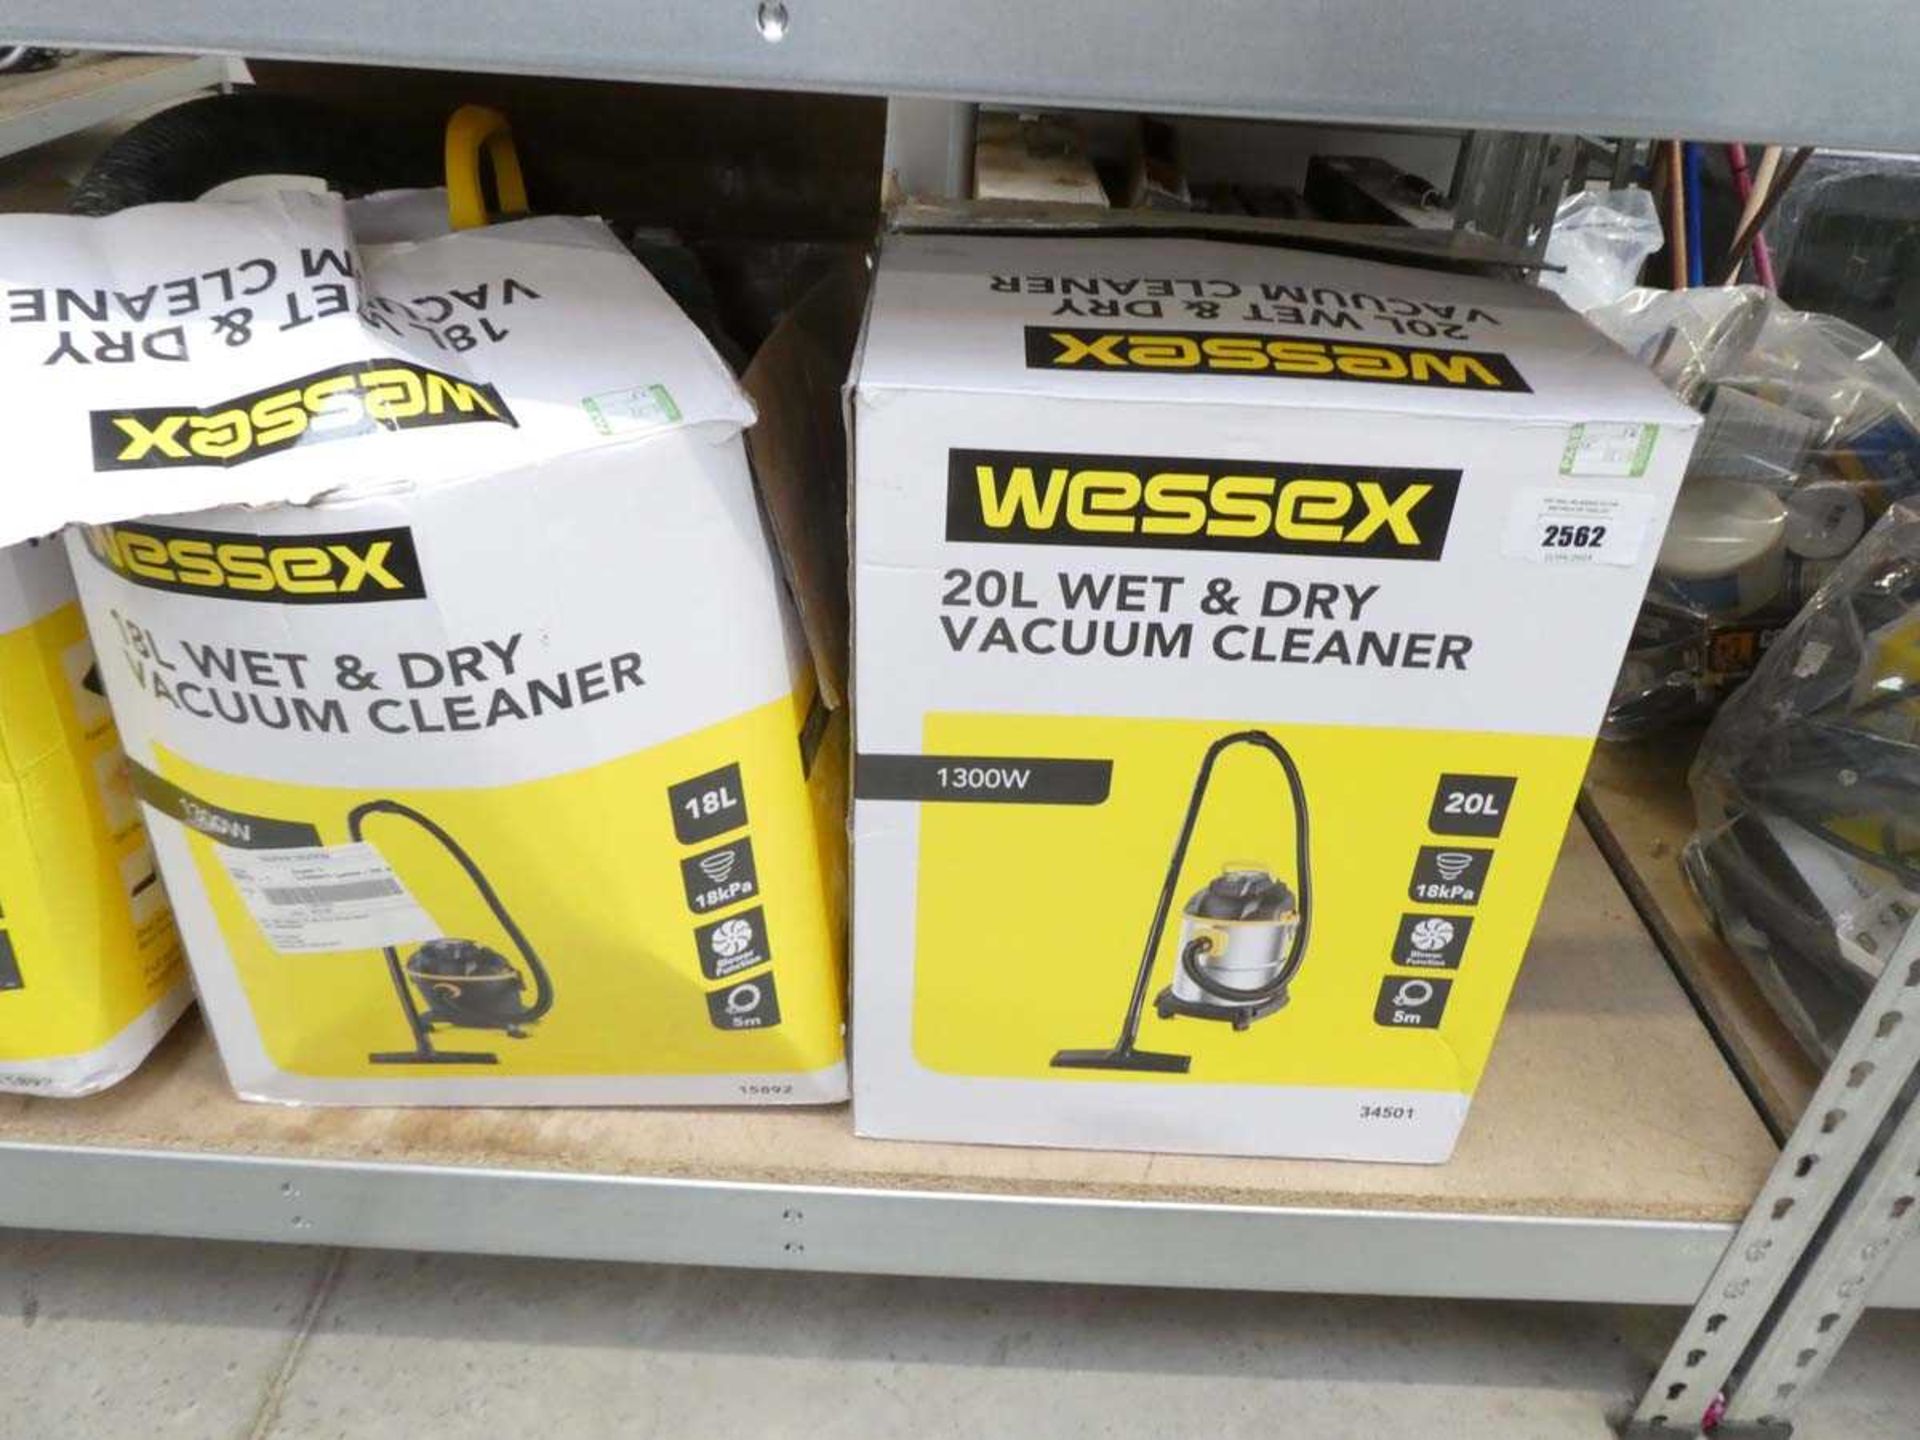 +VAT 2 Wessex 20L wet and dry vacuum cleaners in boxes